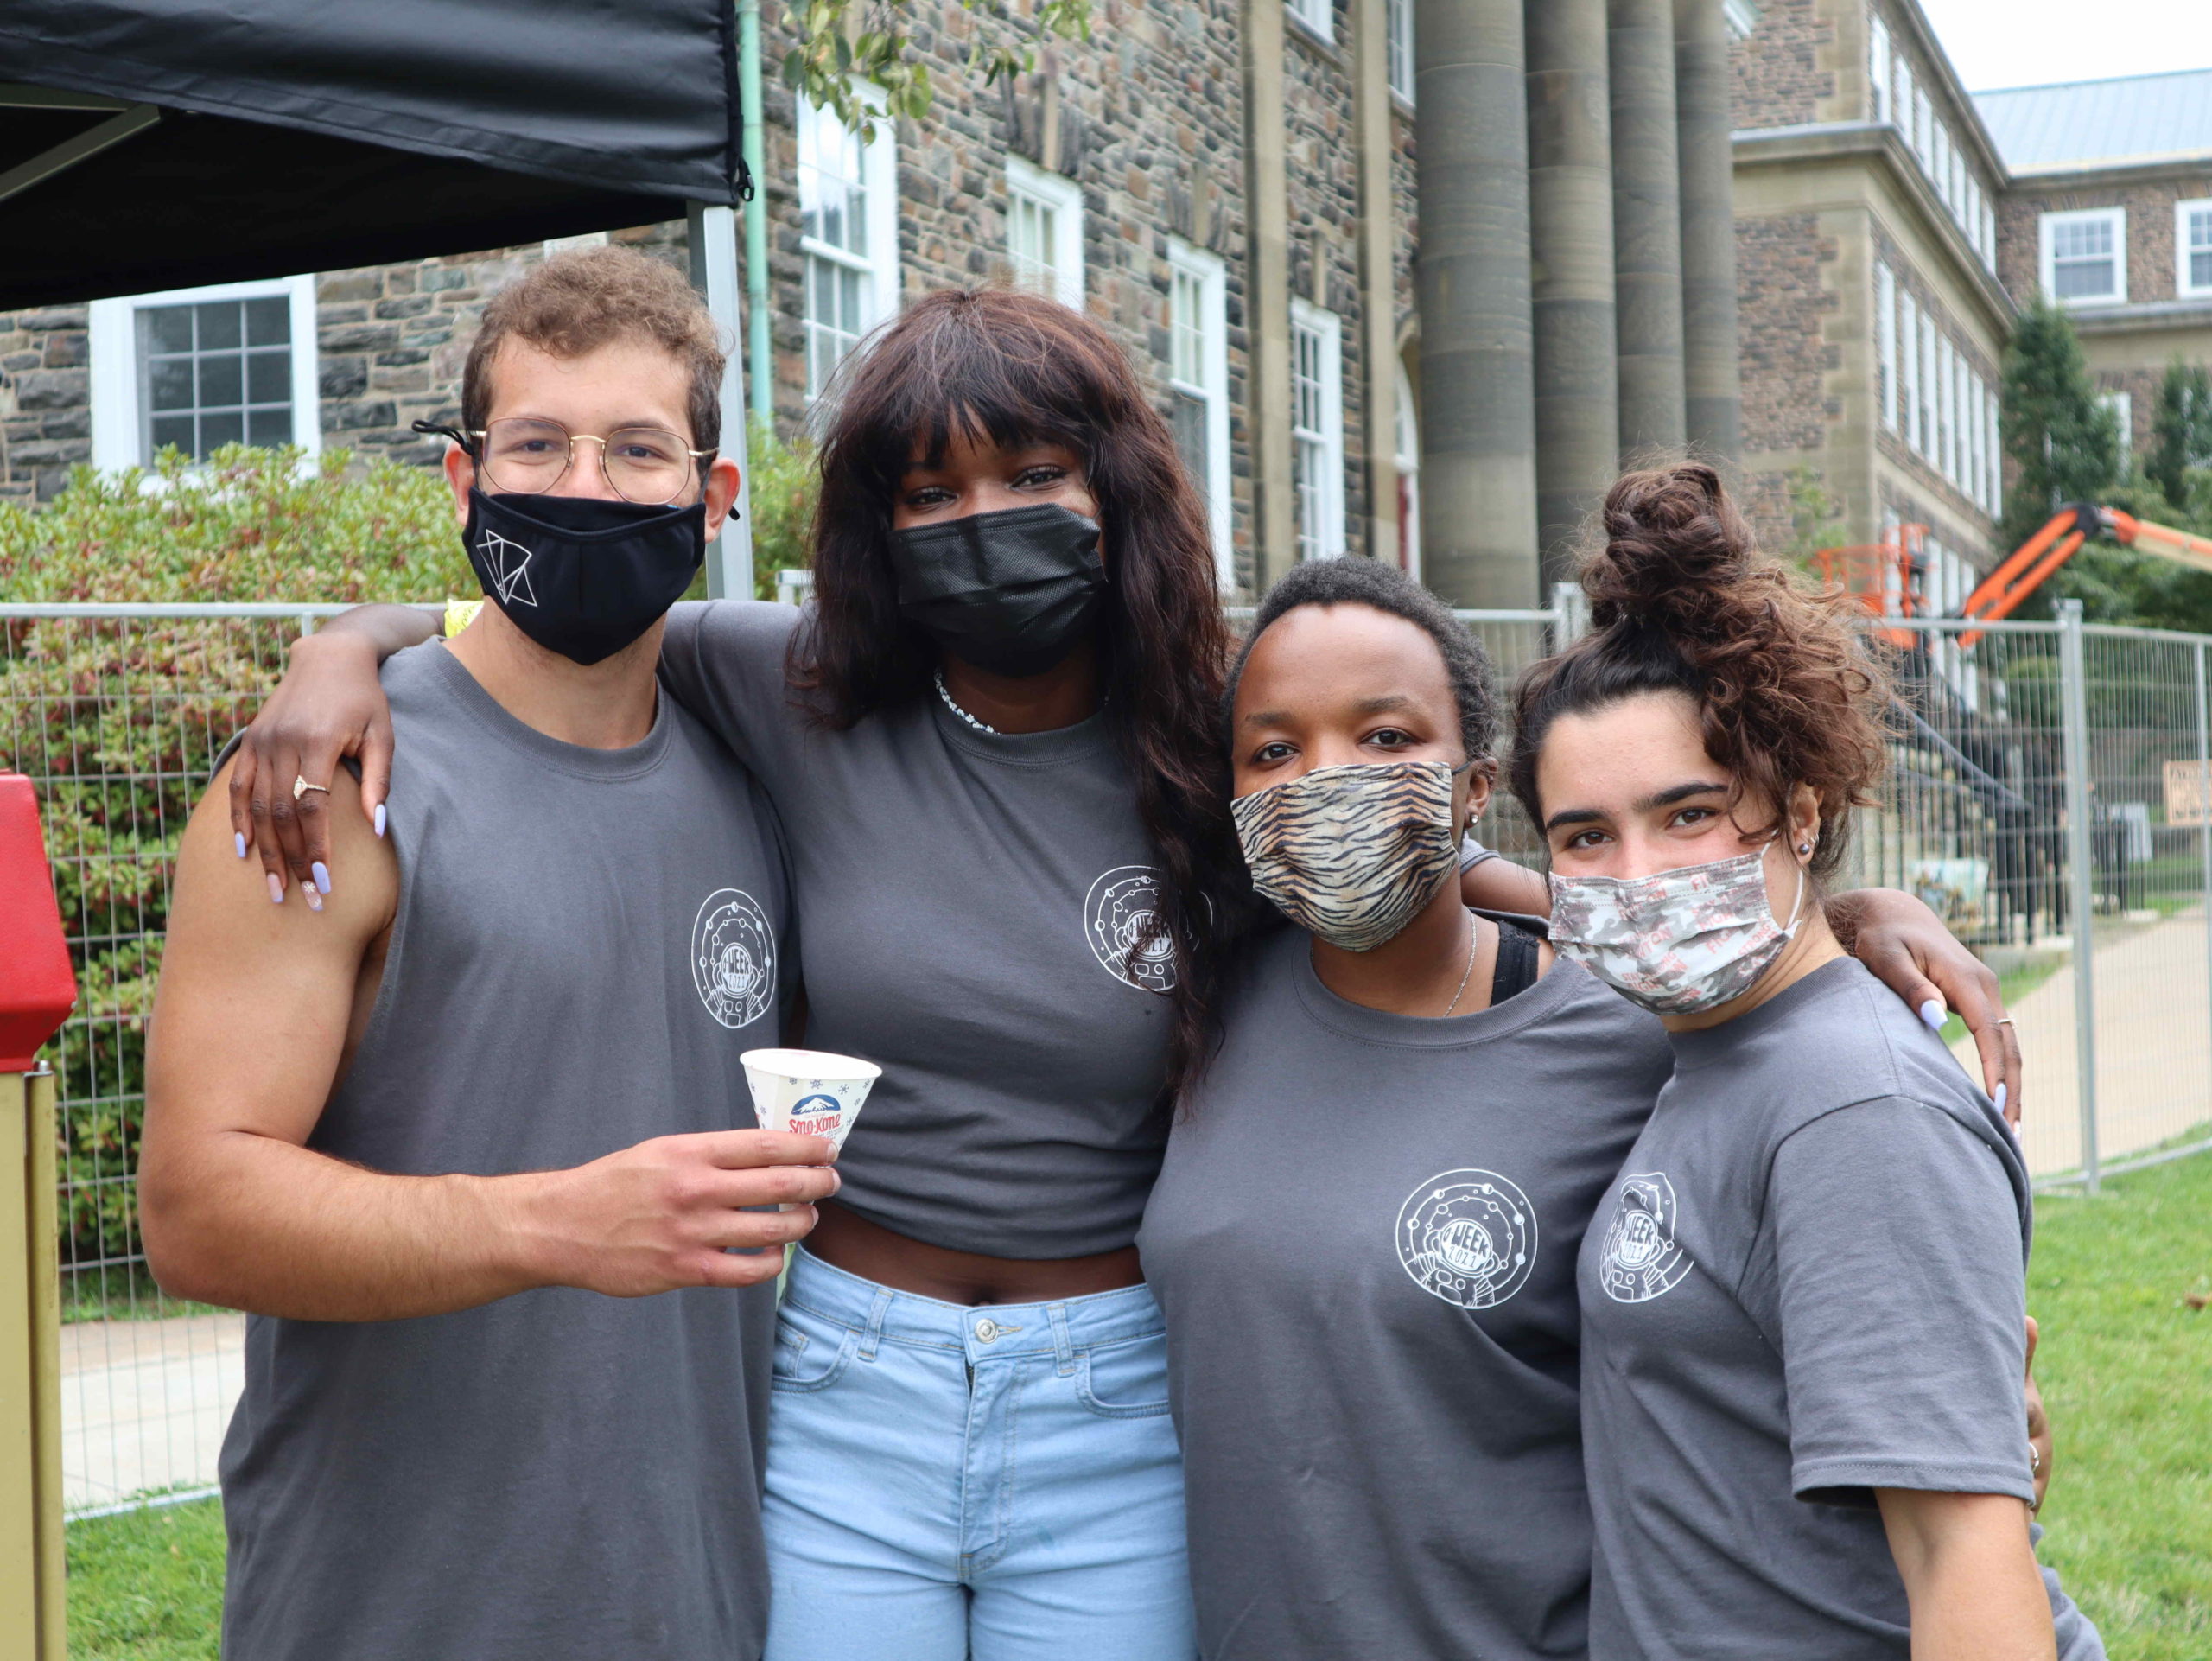 4 Dalhousie students posing for a picture with masks on